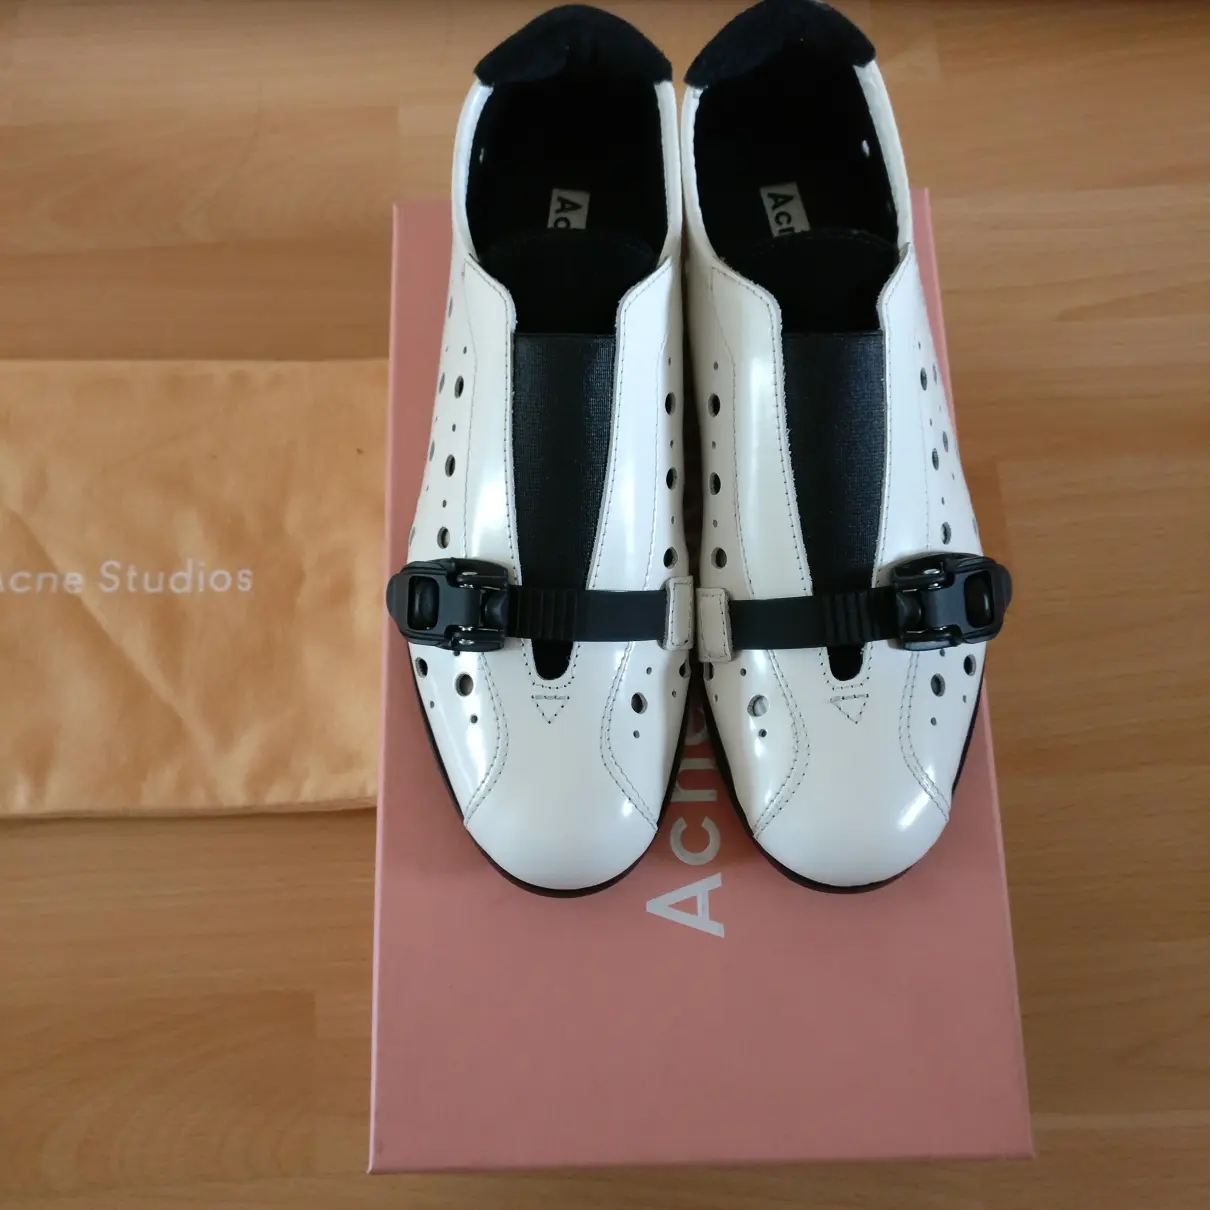 Acne Studios Leather flats for sale